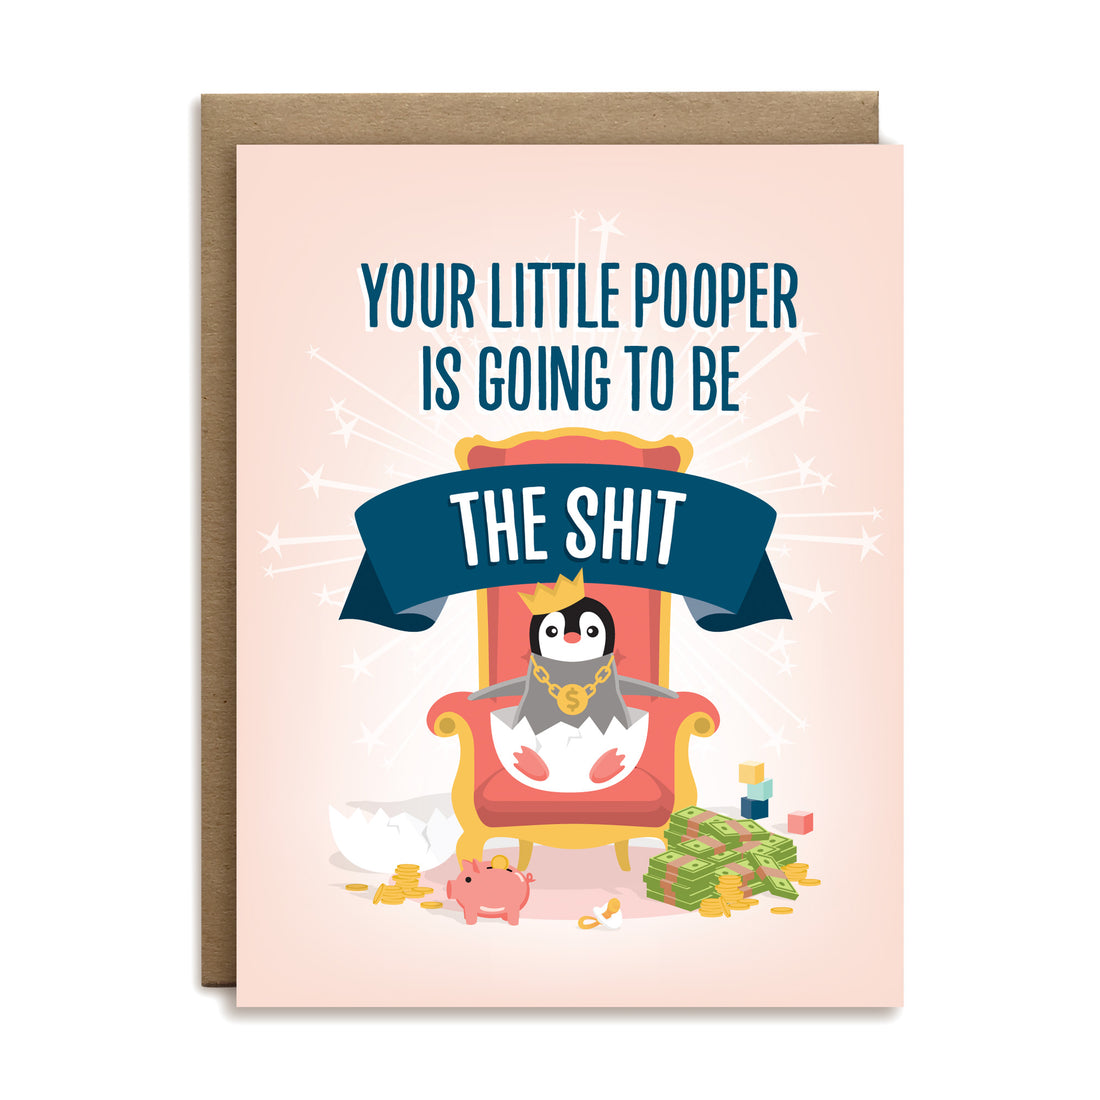 Your little pooper is going to be the shit baby greeting card by I’ll Know It When I See It